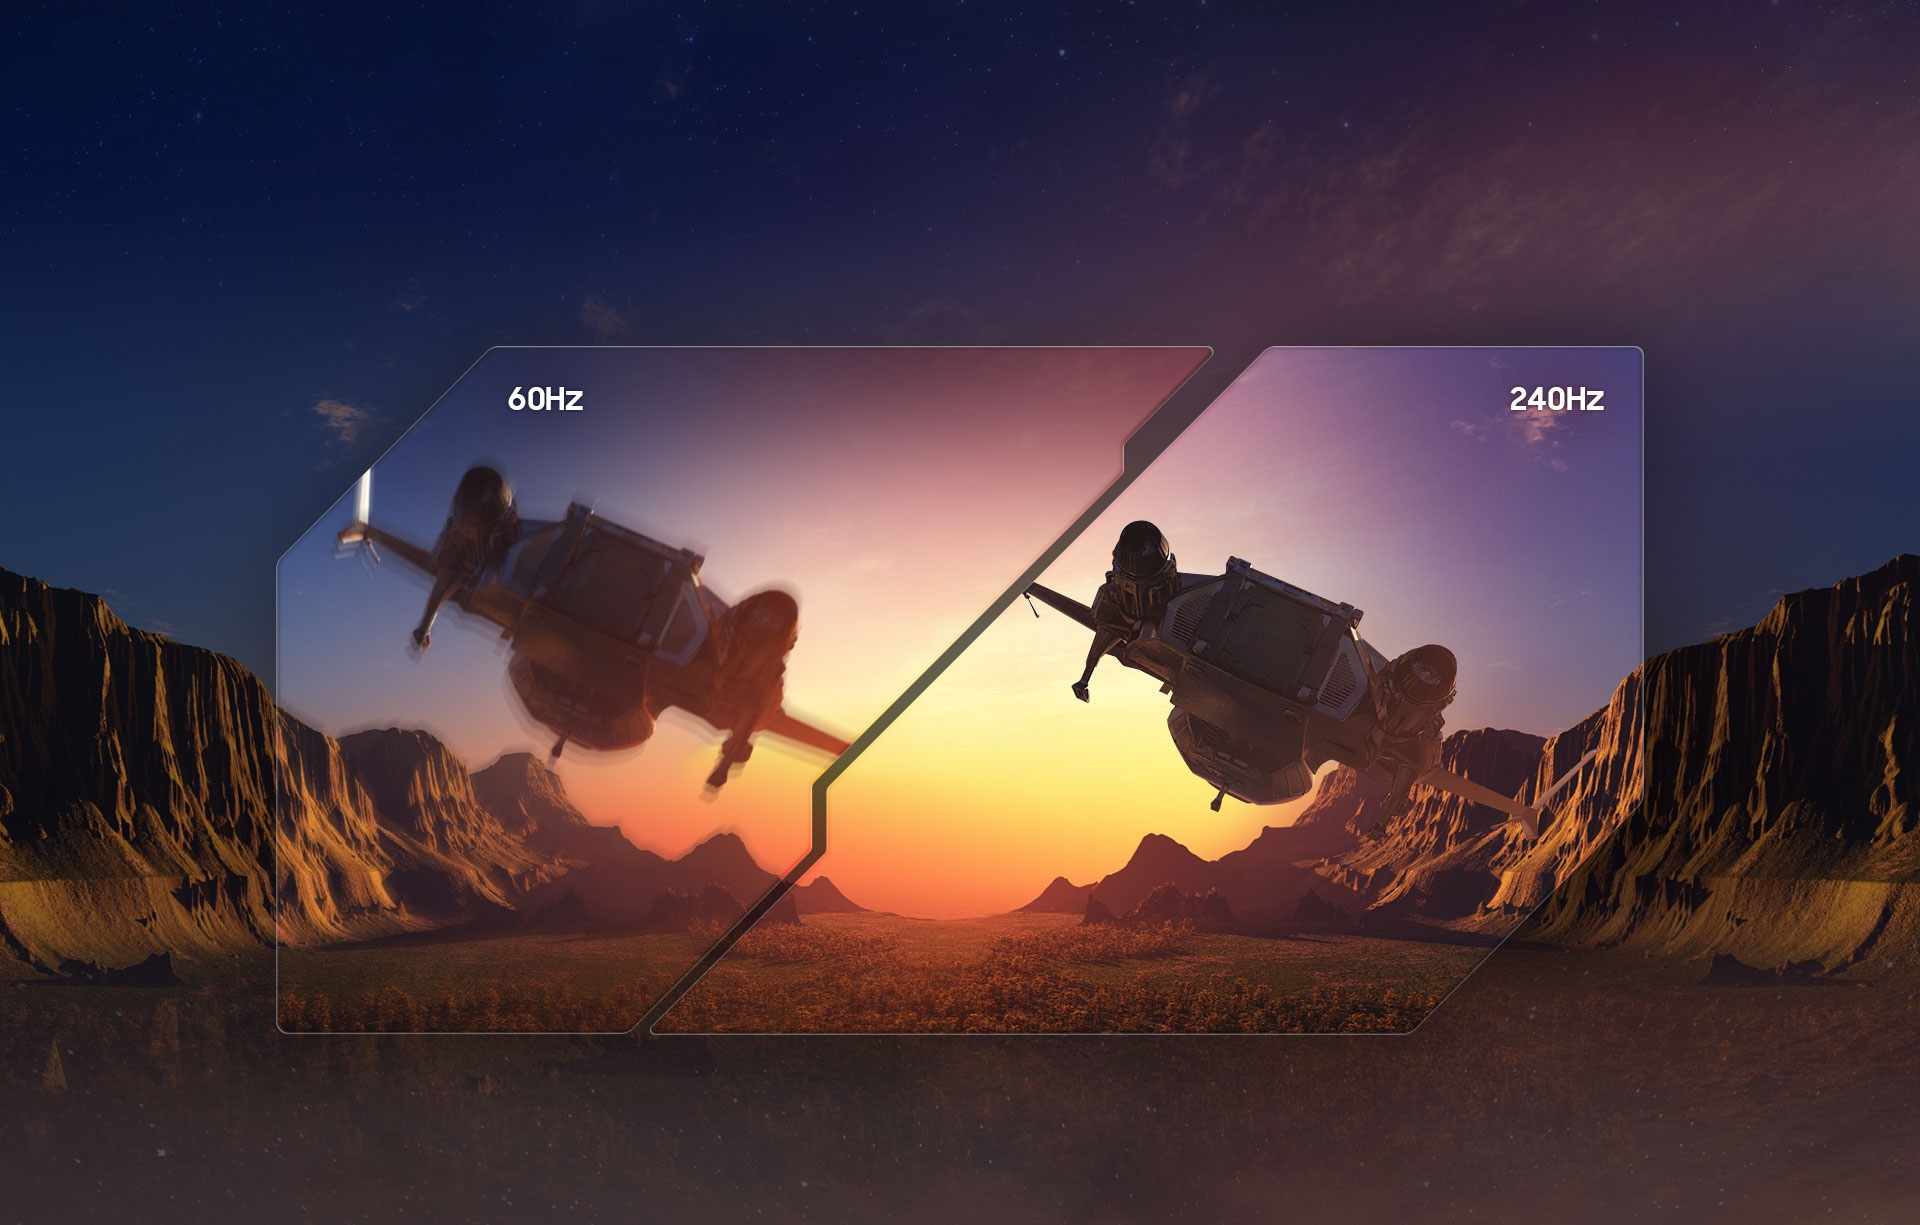 Two spaceships fly away towards a sunset side-by-side inside the valley of a canyon on a desert planet. The spaceship on the left appears blurry and has the words “60Hz” above it. The spaceship on the right appears smooth and shows the words “240Hz” above.